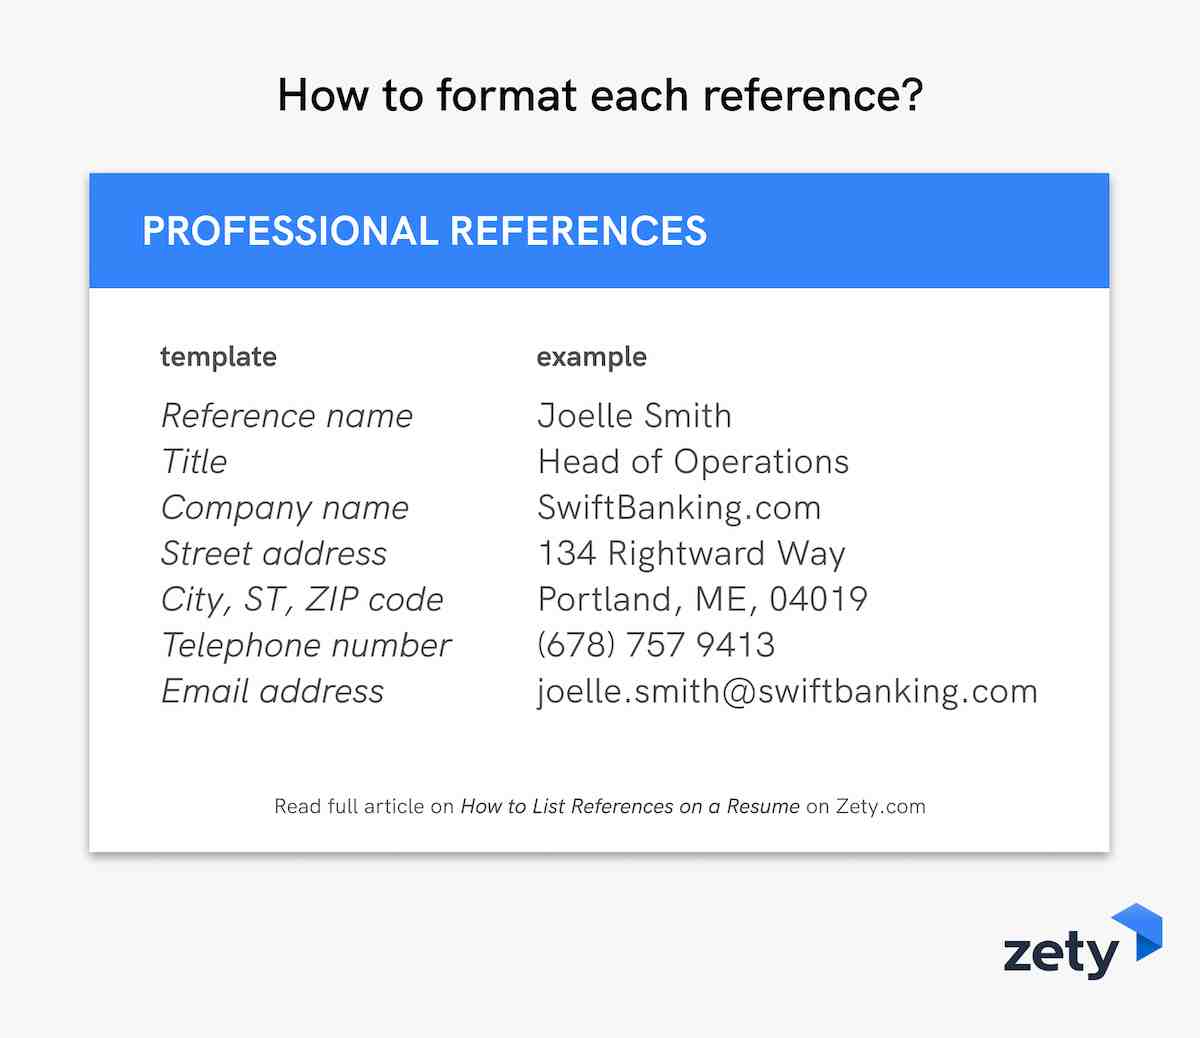 How to format each reference?